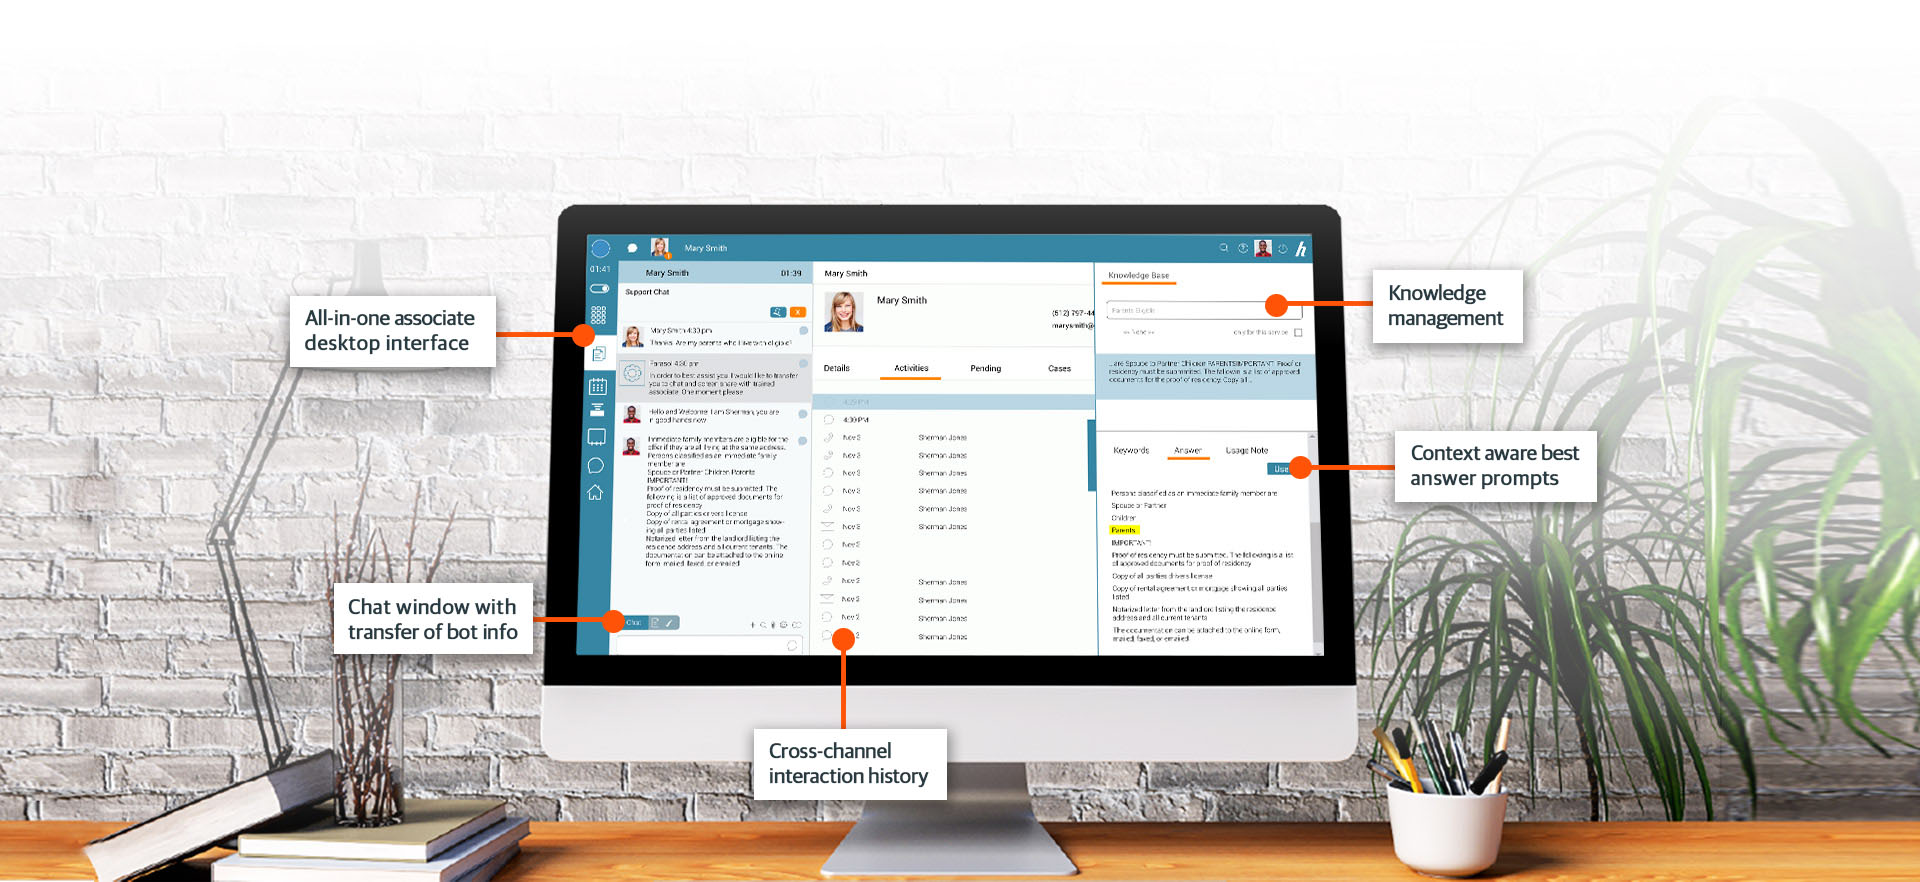 Our omnichannel contact center software features an intuitive, all-in-one desktop